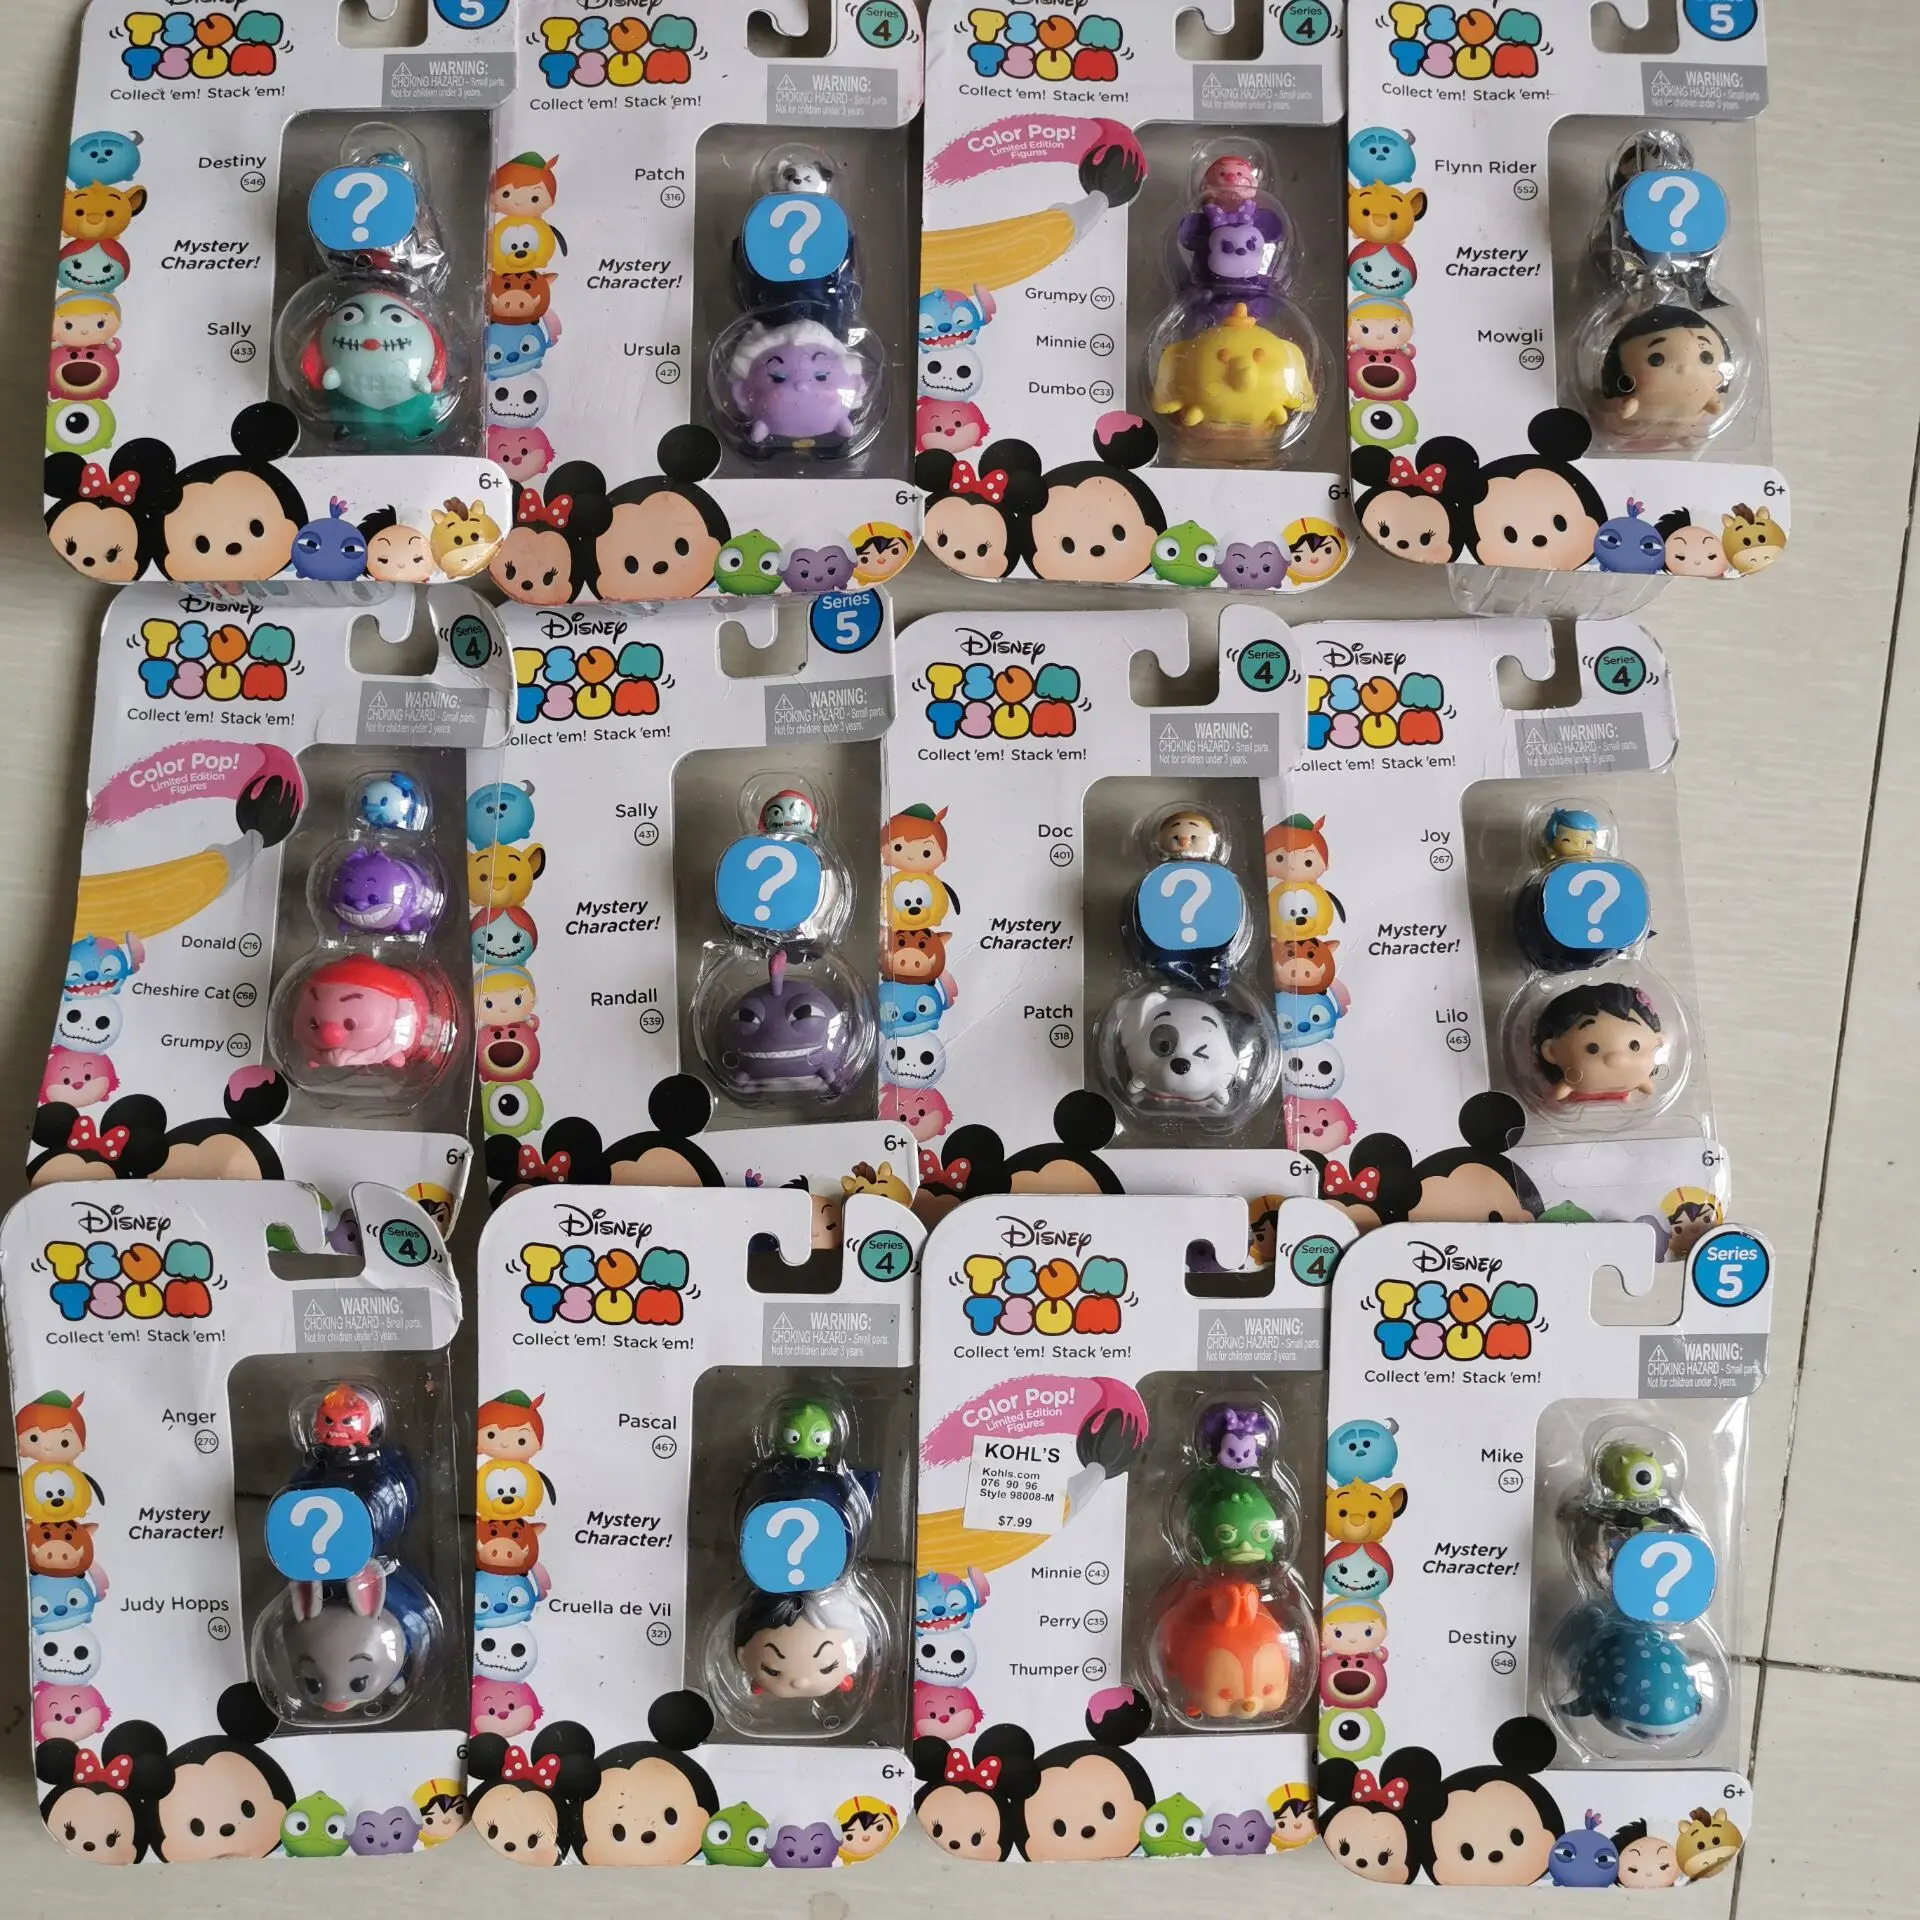 Disney Cartoon Tsum Tsum Toy Action Figure Doll Collection Figurine Cute  Gift Tabletop Ornament Children Gifts - Fantasy Figurines - AliExpress